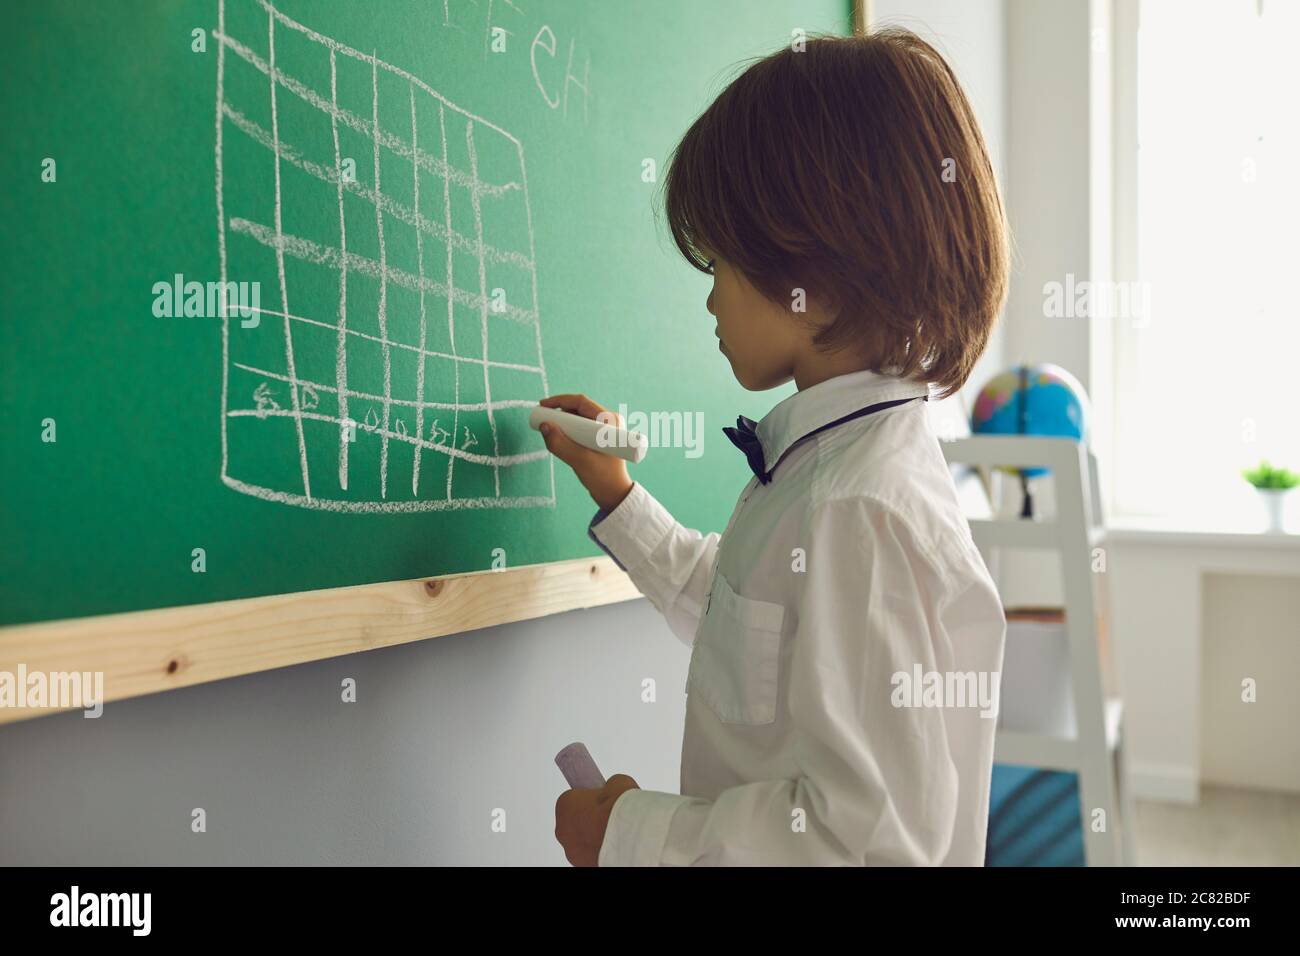 Chess lesson for children. Boy draws a chessboard on the green board in the classroom. Stock Photo